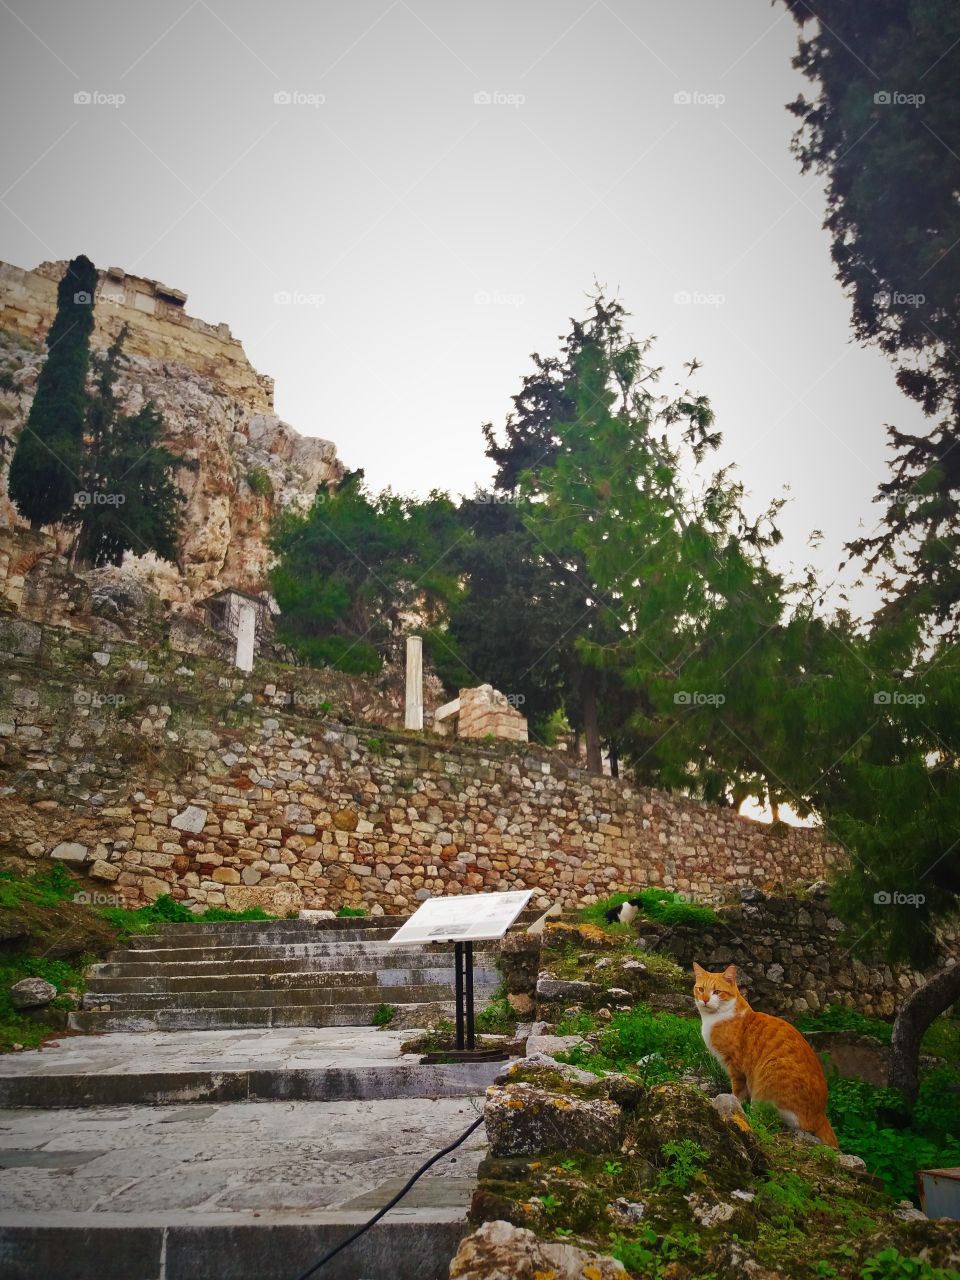 cat on a hill, Athens, Greece